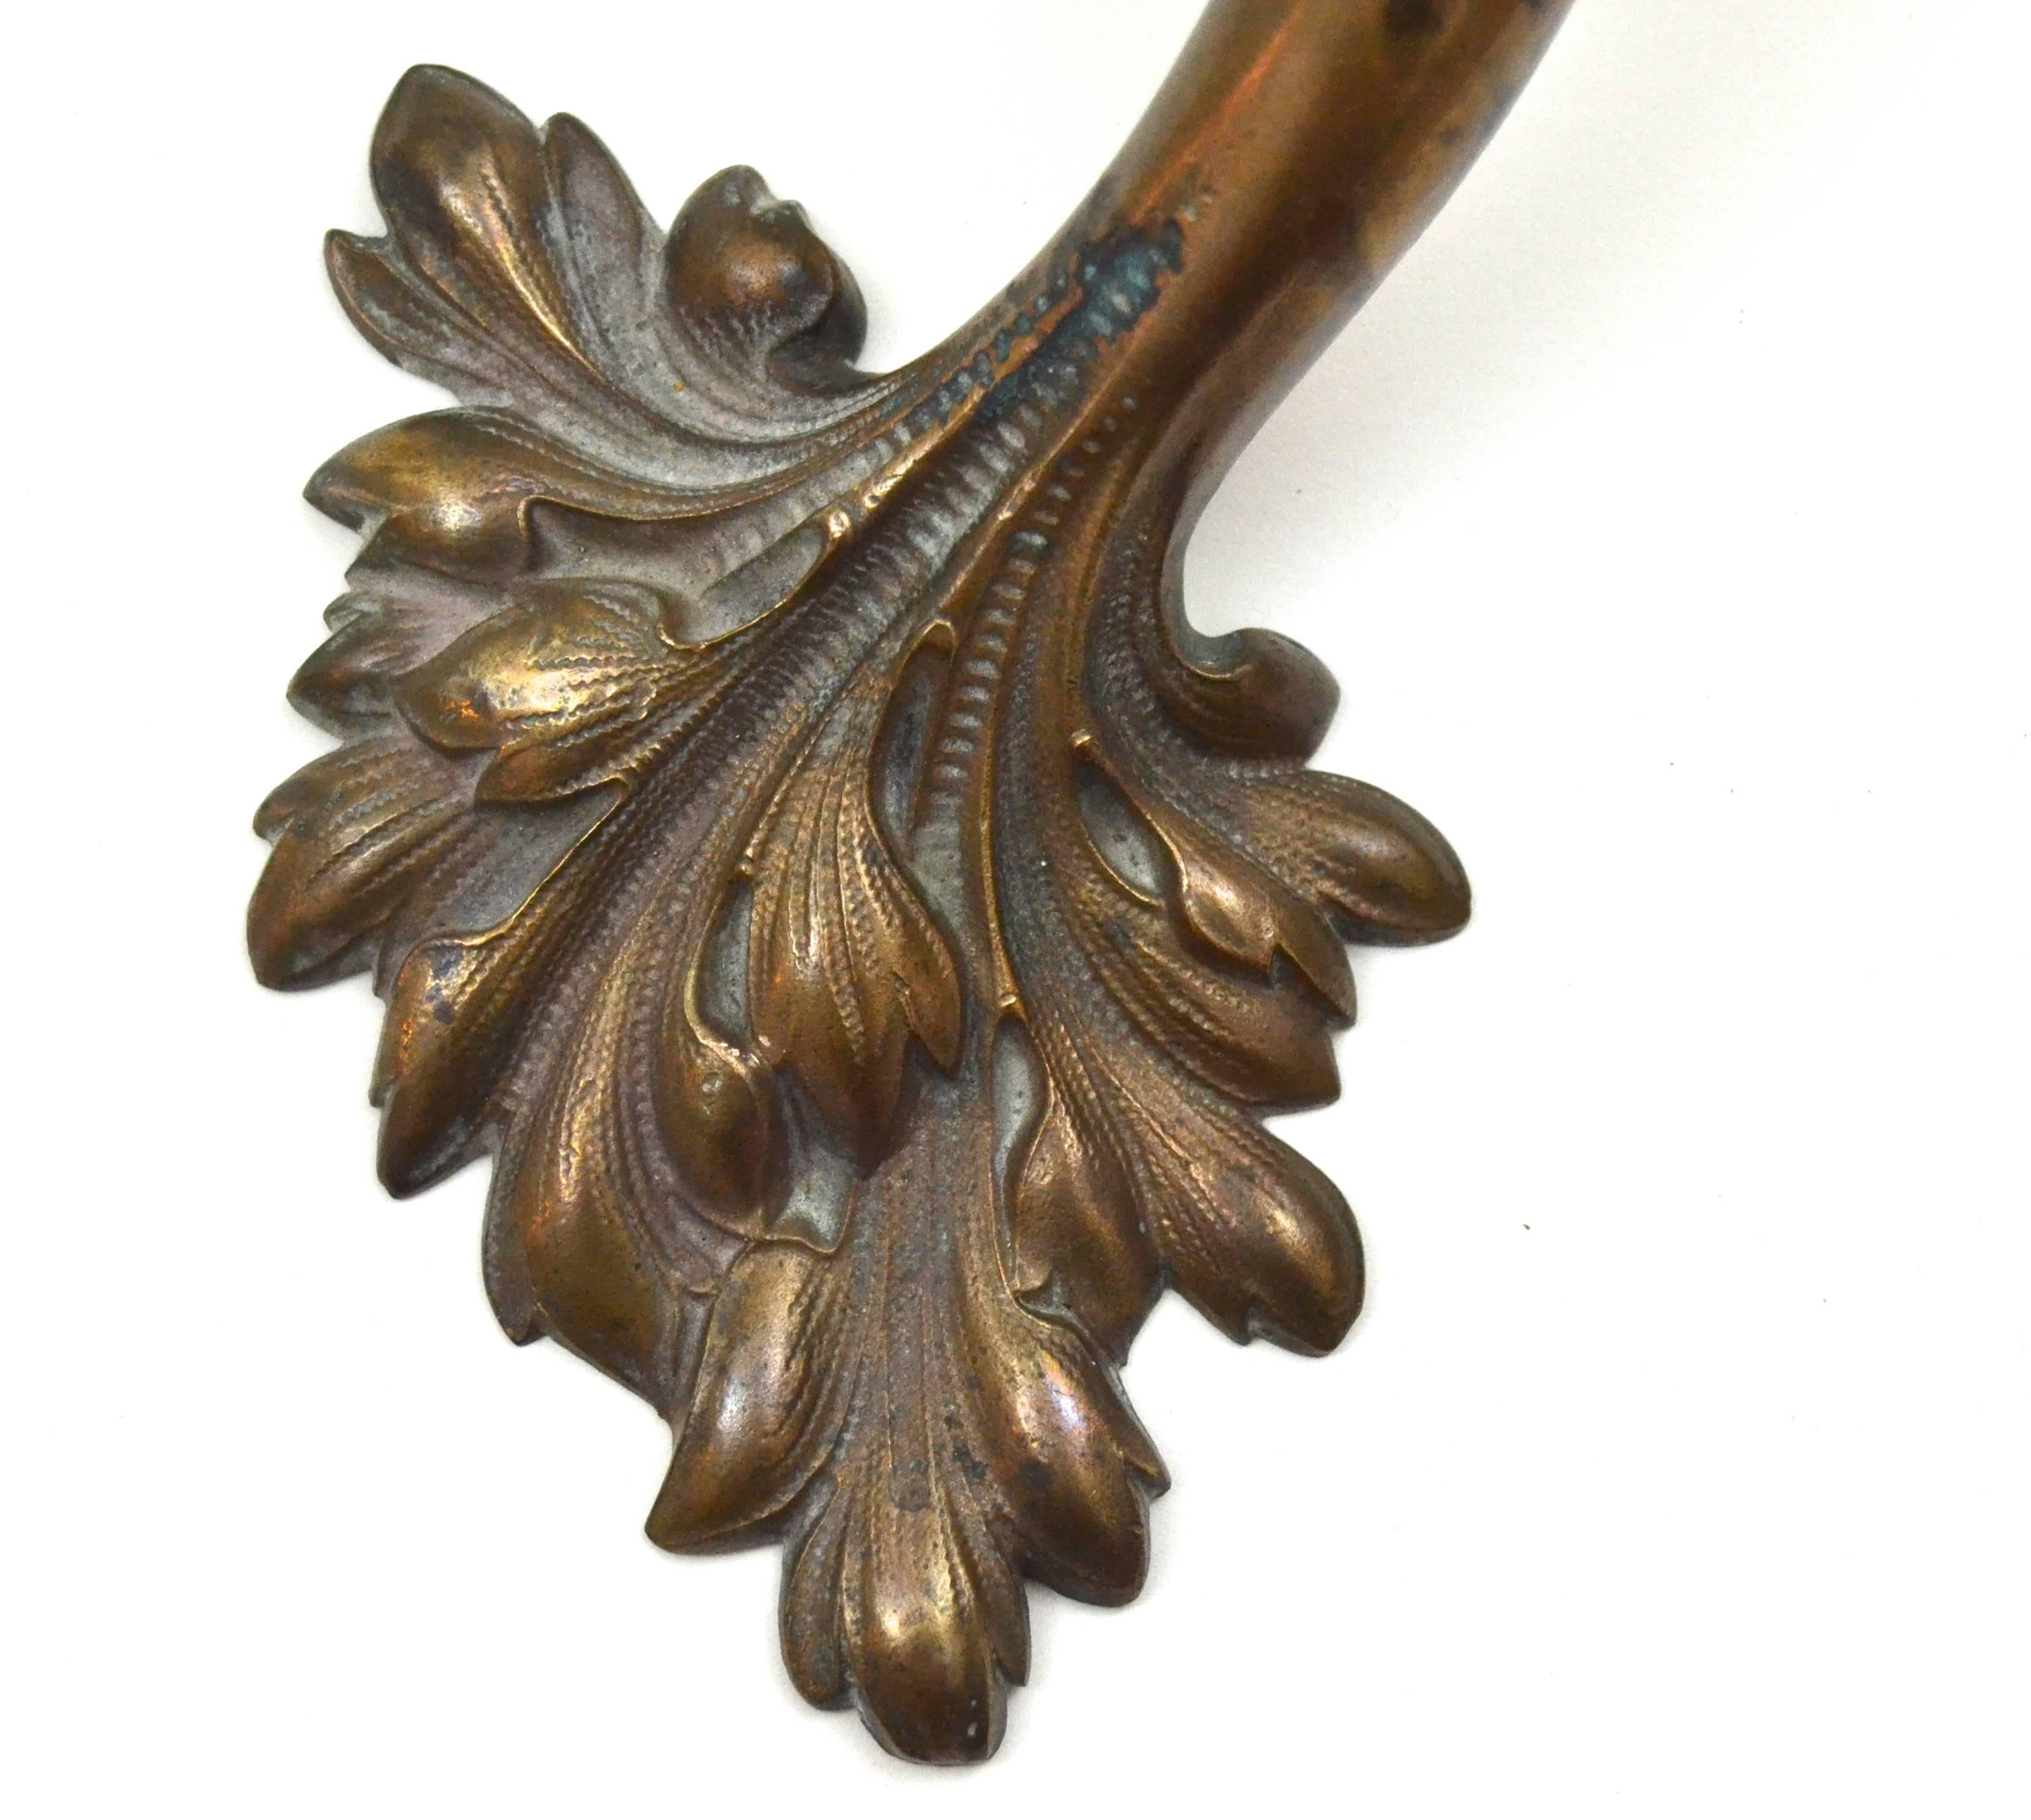 Sinuous leaf form bronze door handle of exceptional patina and casting. Great deep color and gutsy form. The curvaceous handle anchored by the organic forms makes a lovely sculptural statement.